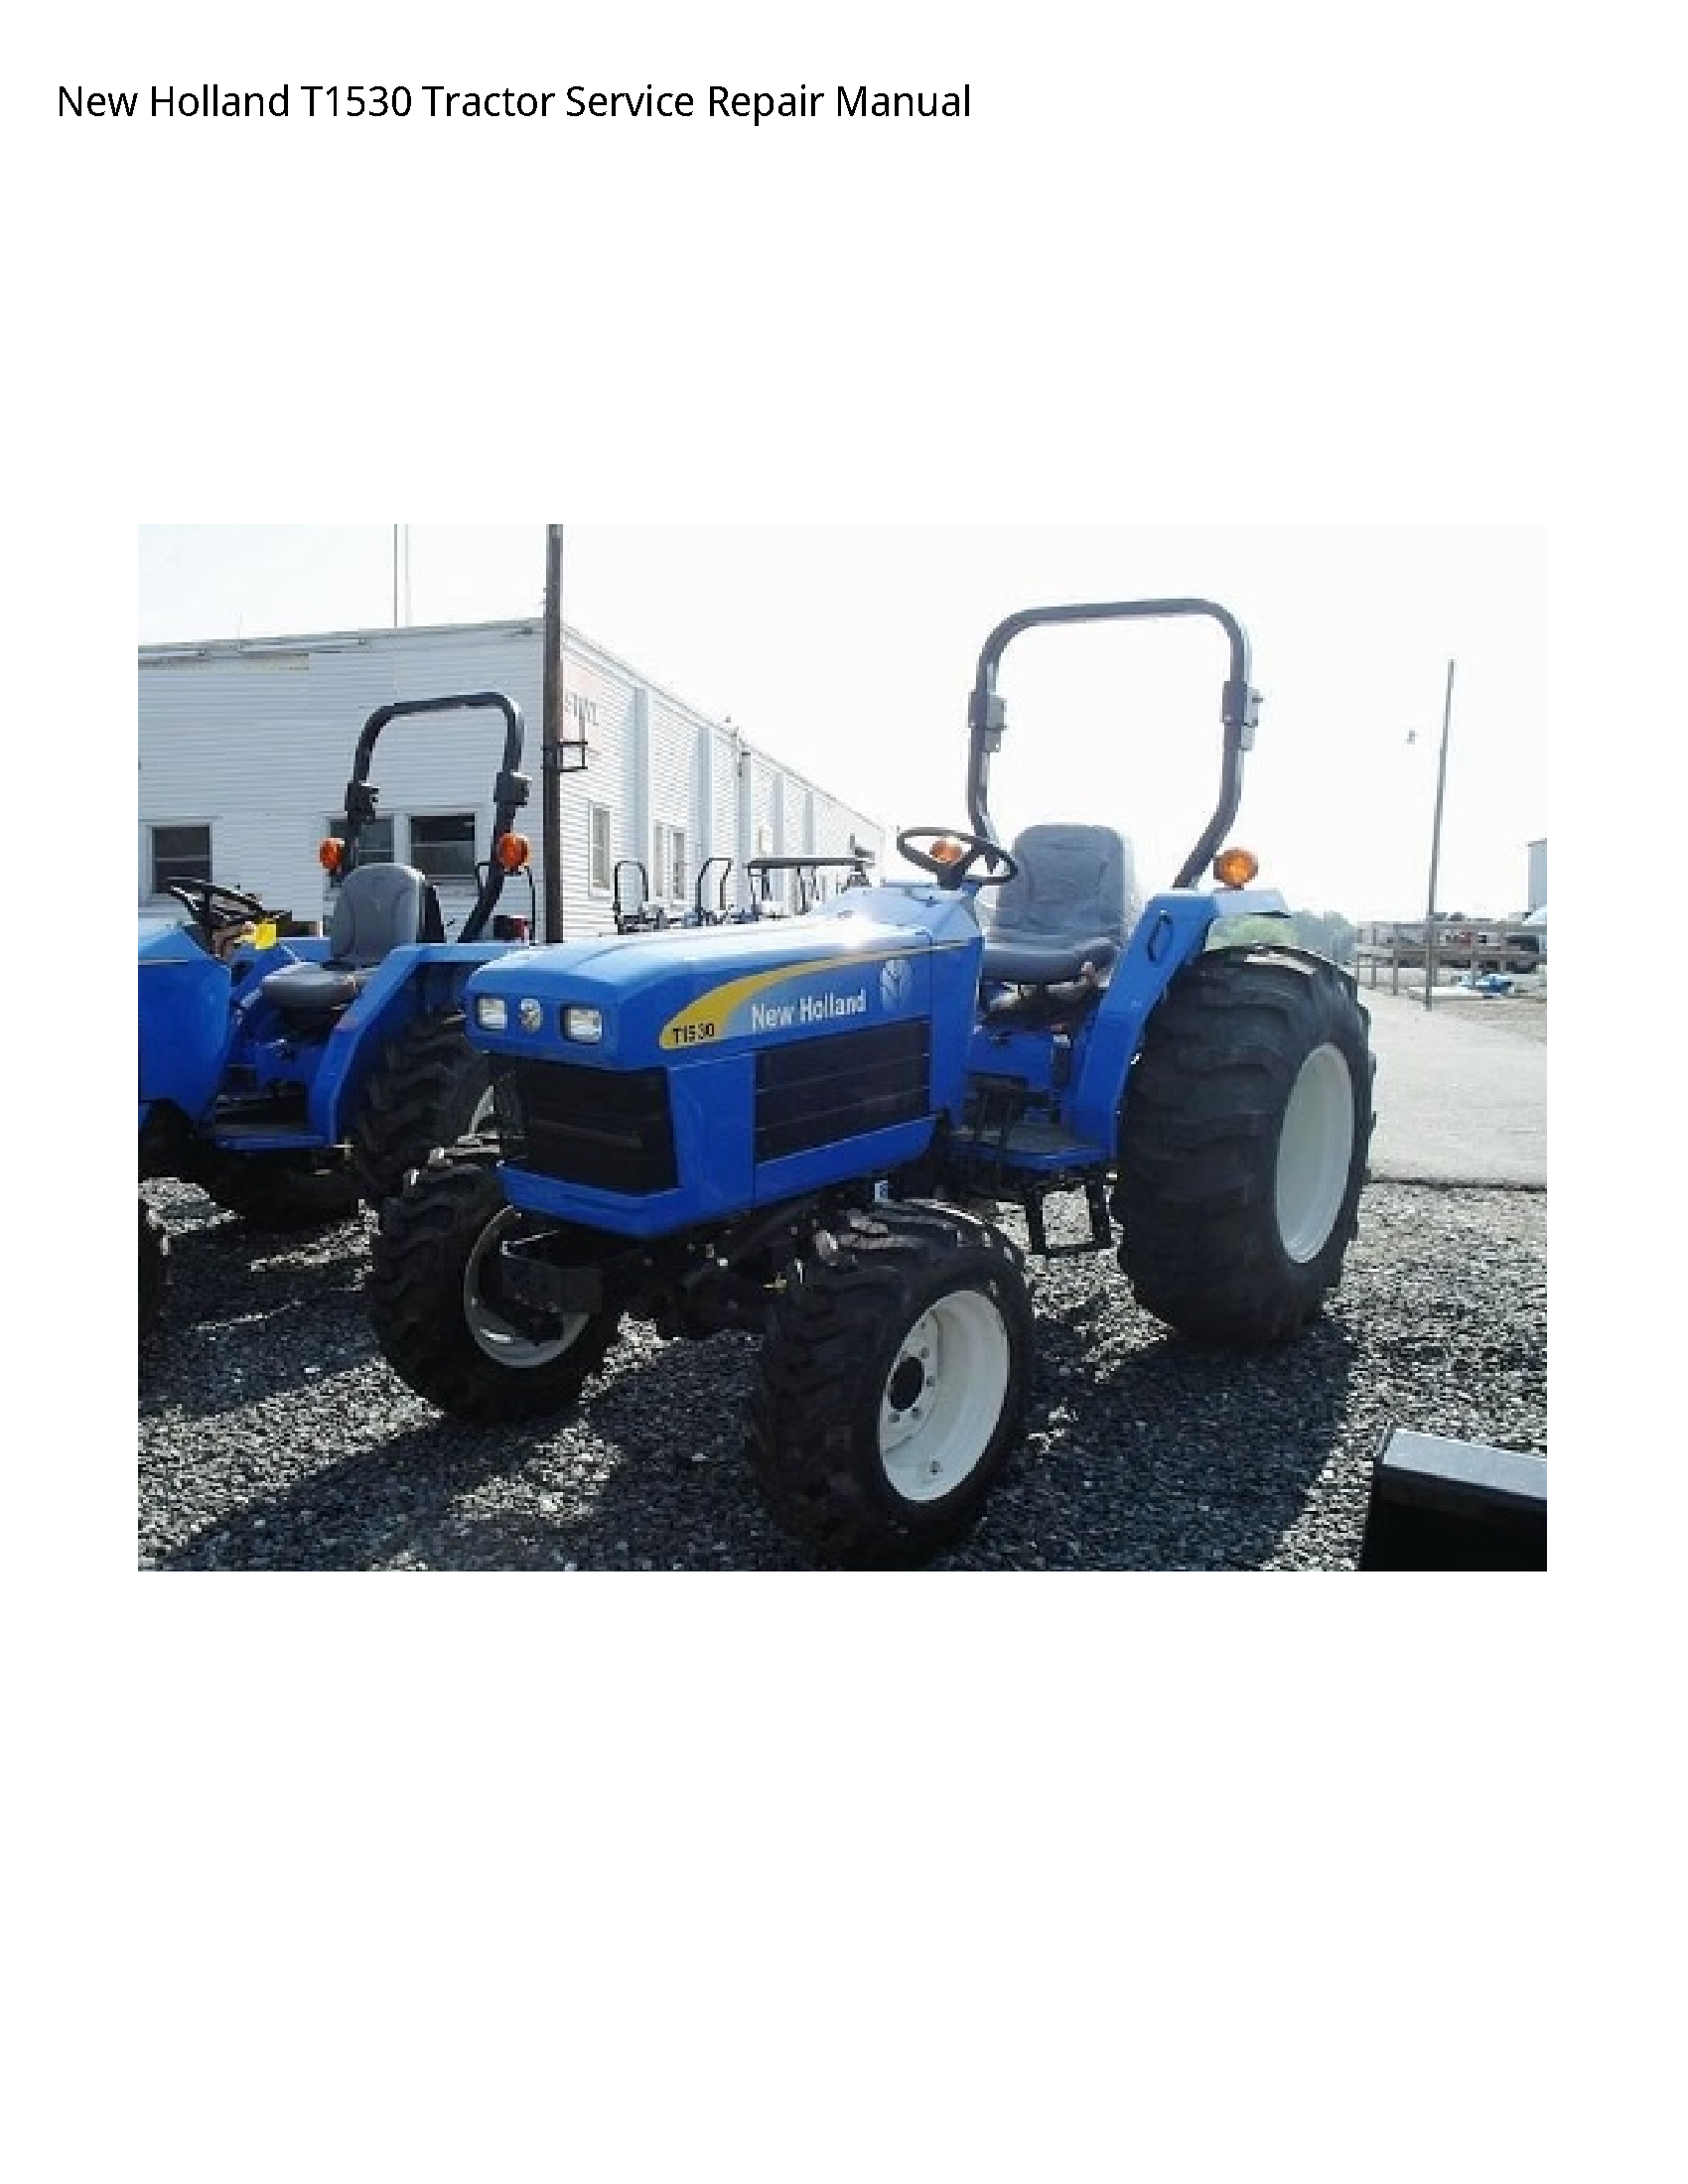 New Holland T1530 Tractor manual